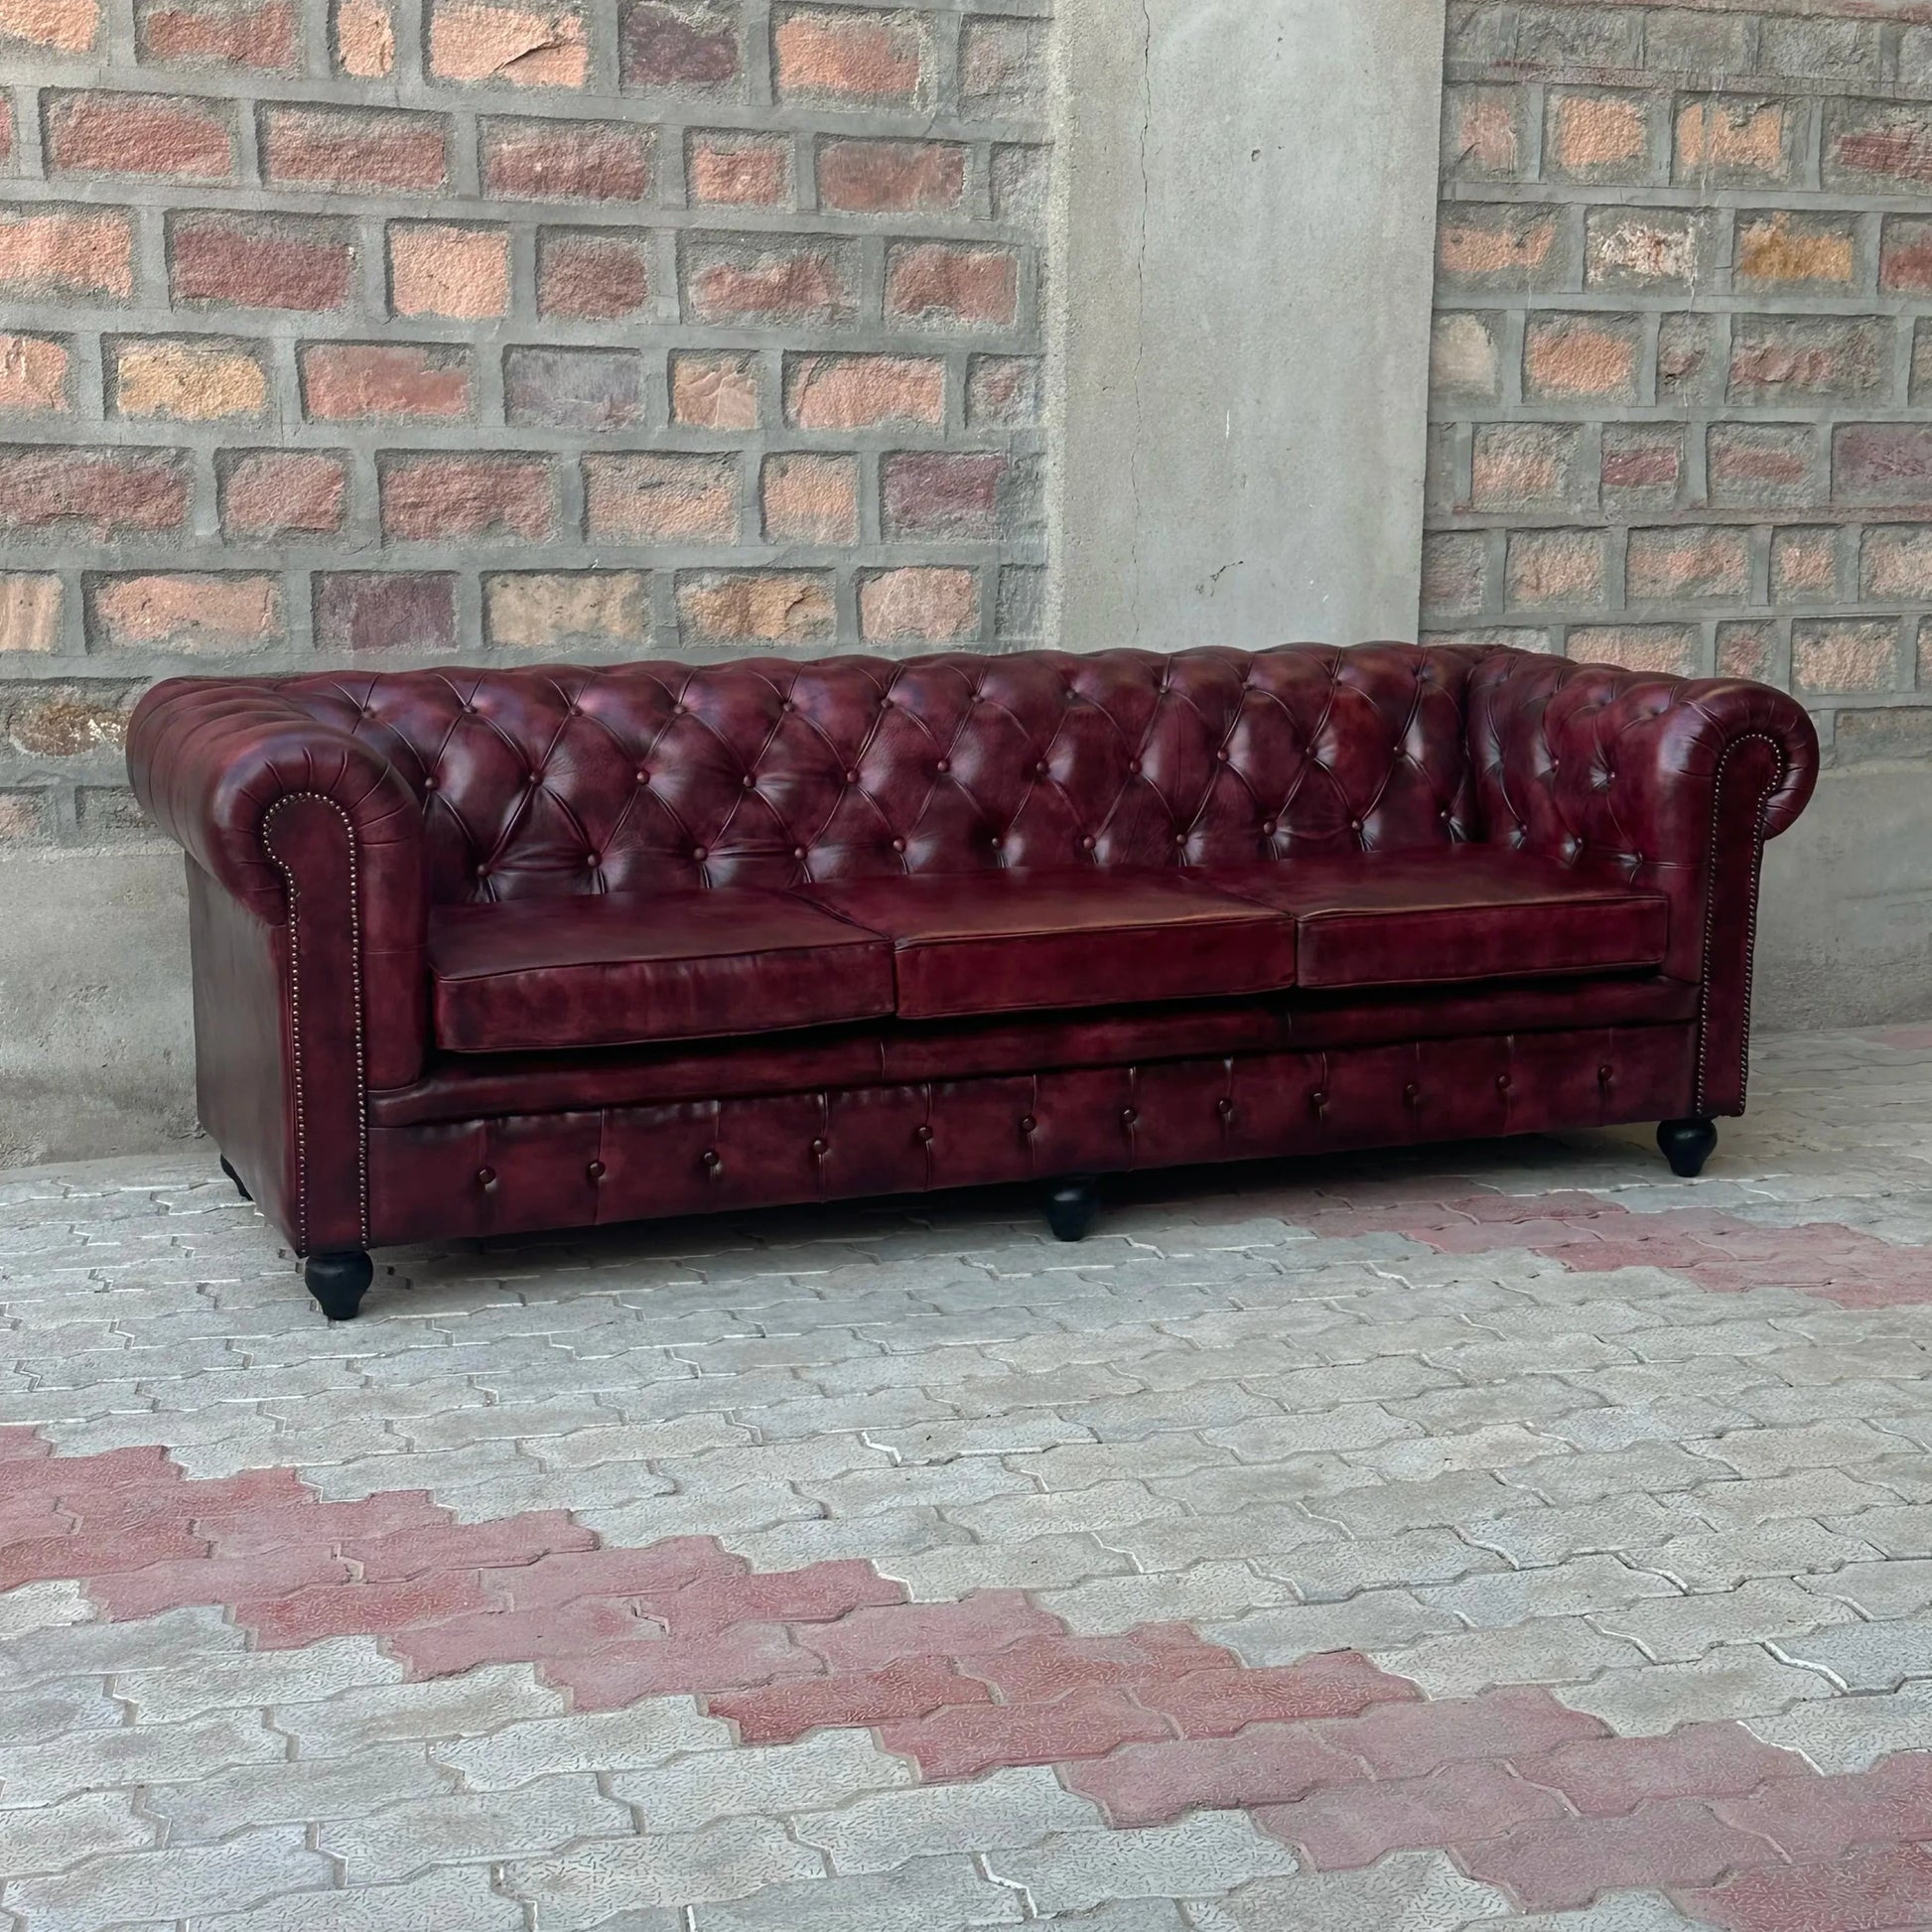 95" Sofa Normal Cushions | Oxford Red Chesterfield Leather Sofa with Normal Cushions (OR-4C) by Rising Tide Design Co.